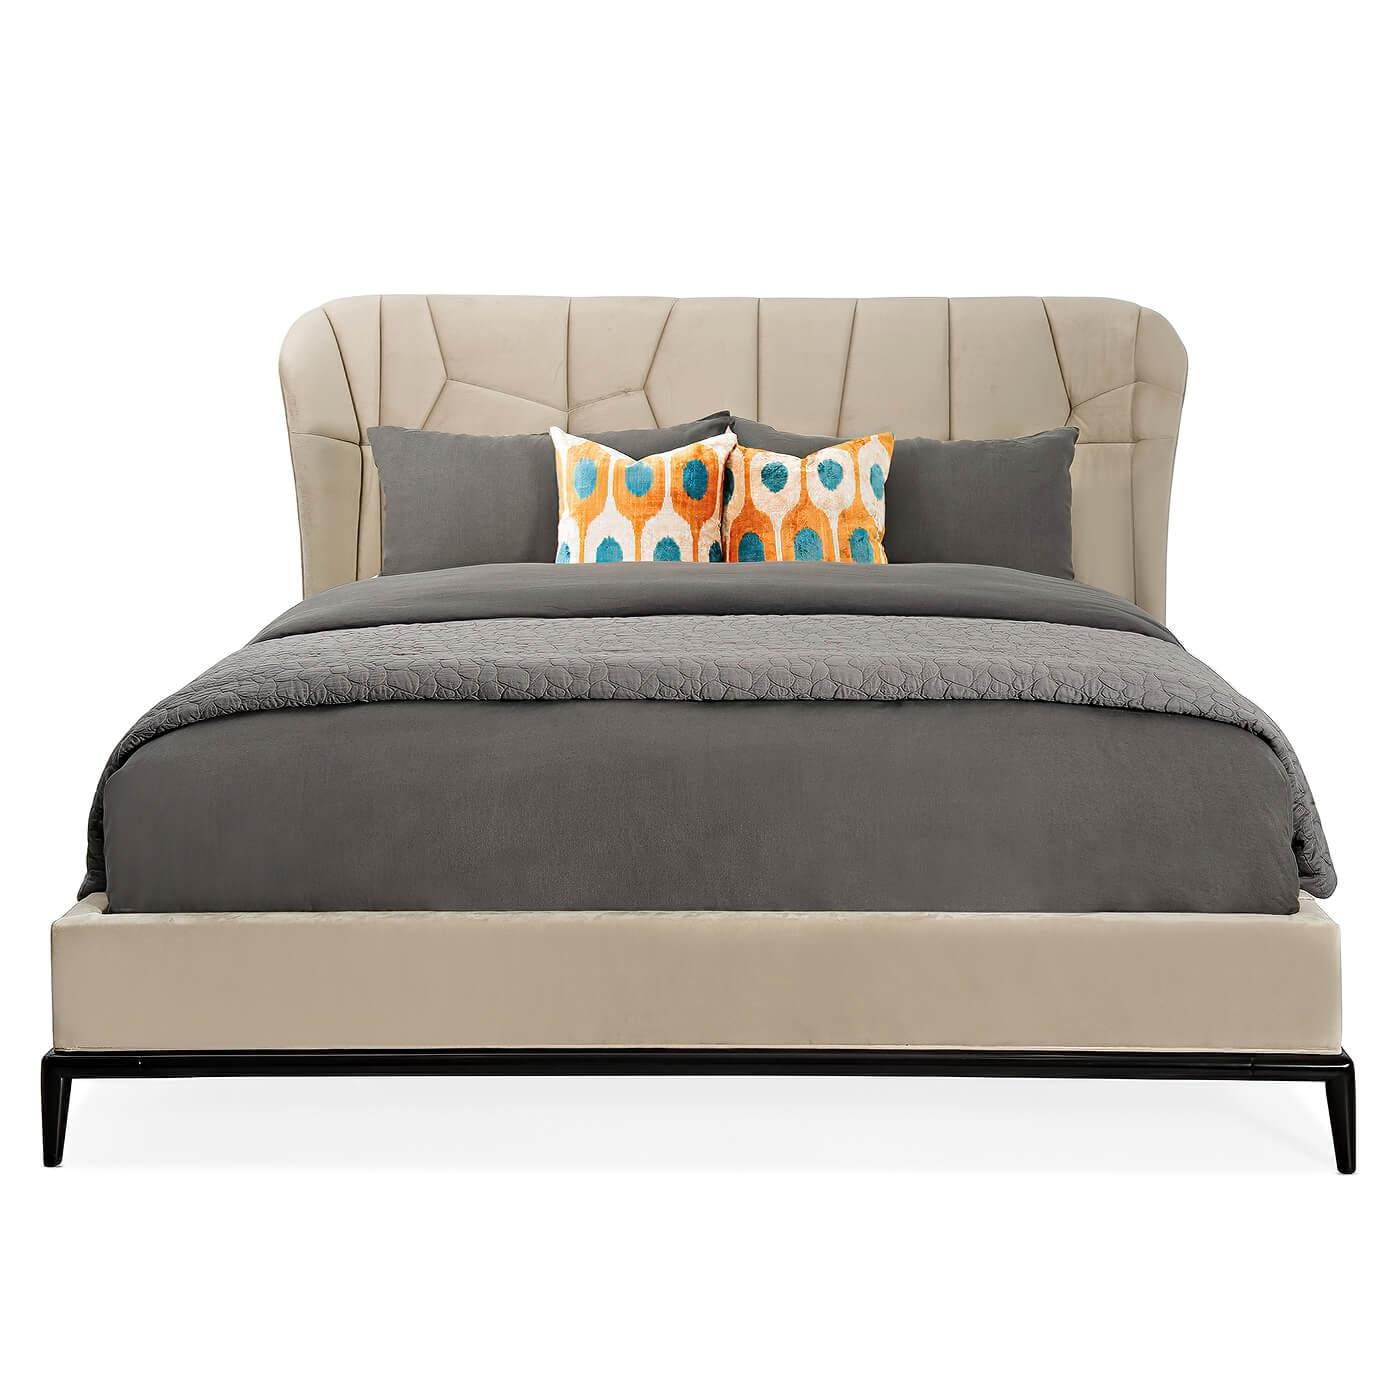 A Modern Classic upholstered queen bed. Its bold design offers a refreshing interpretation of the wing bed and takes it to new heights with a sophisticated Silhouette and custom geometric quilting. The uniquely stitched headboard features wings that